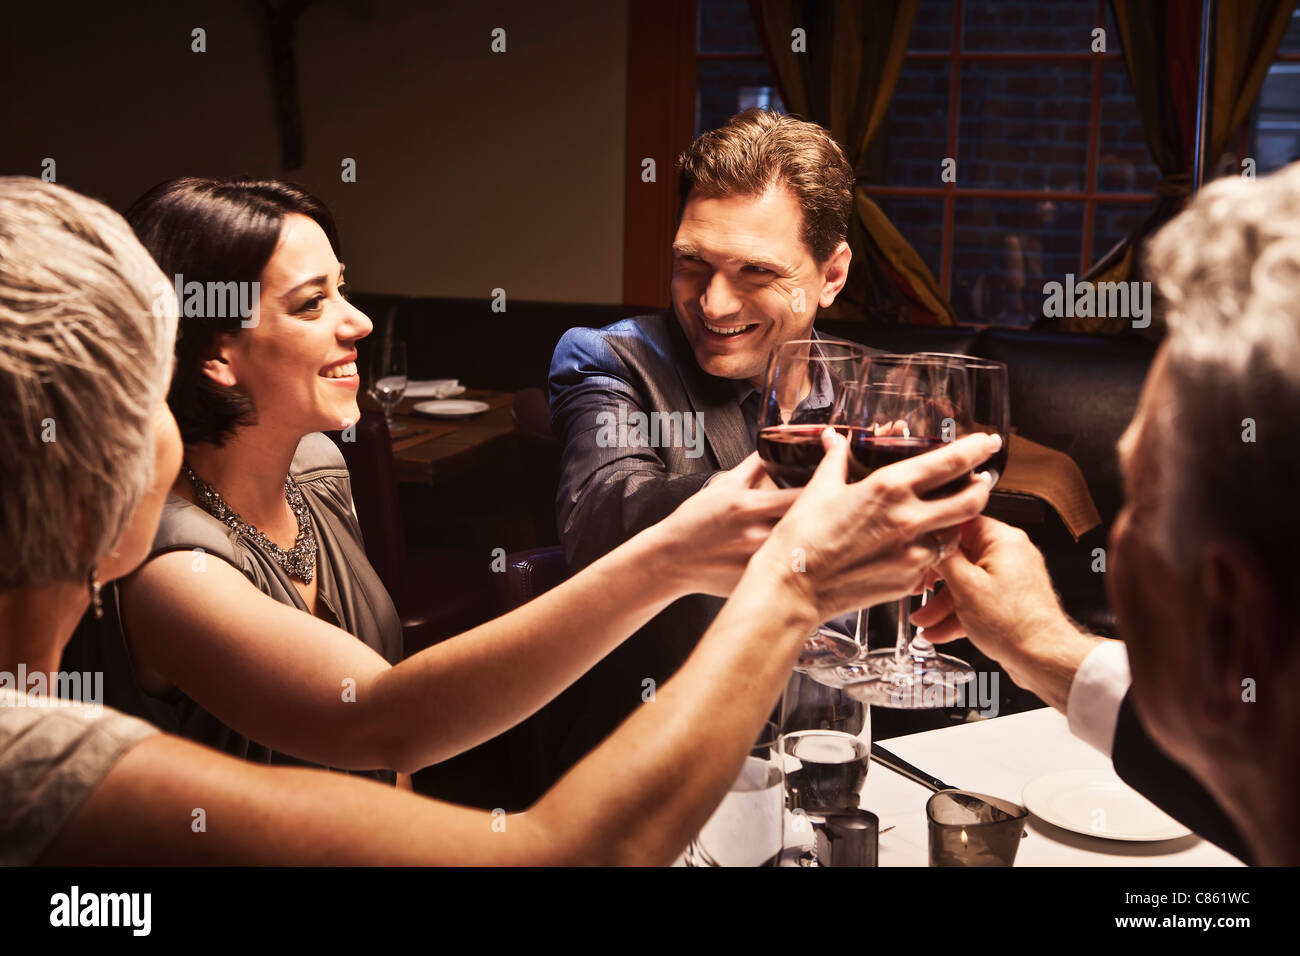 Couples Toasting With Red Wine In Restaurant Stock Photo Alamy